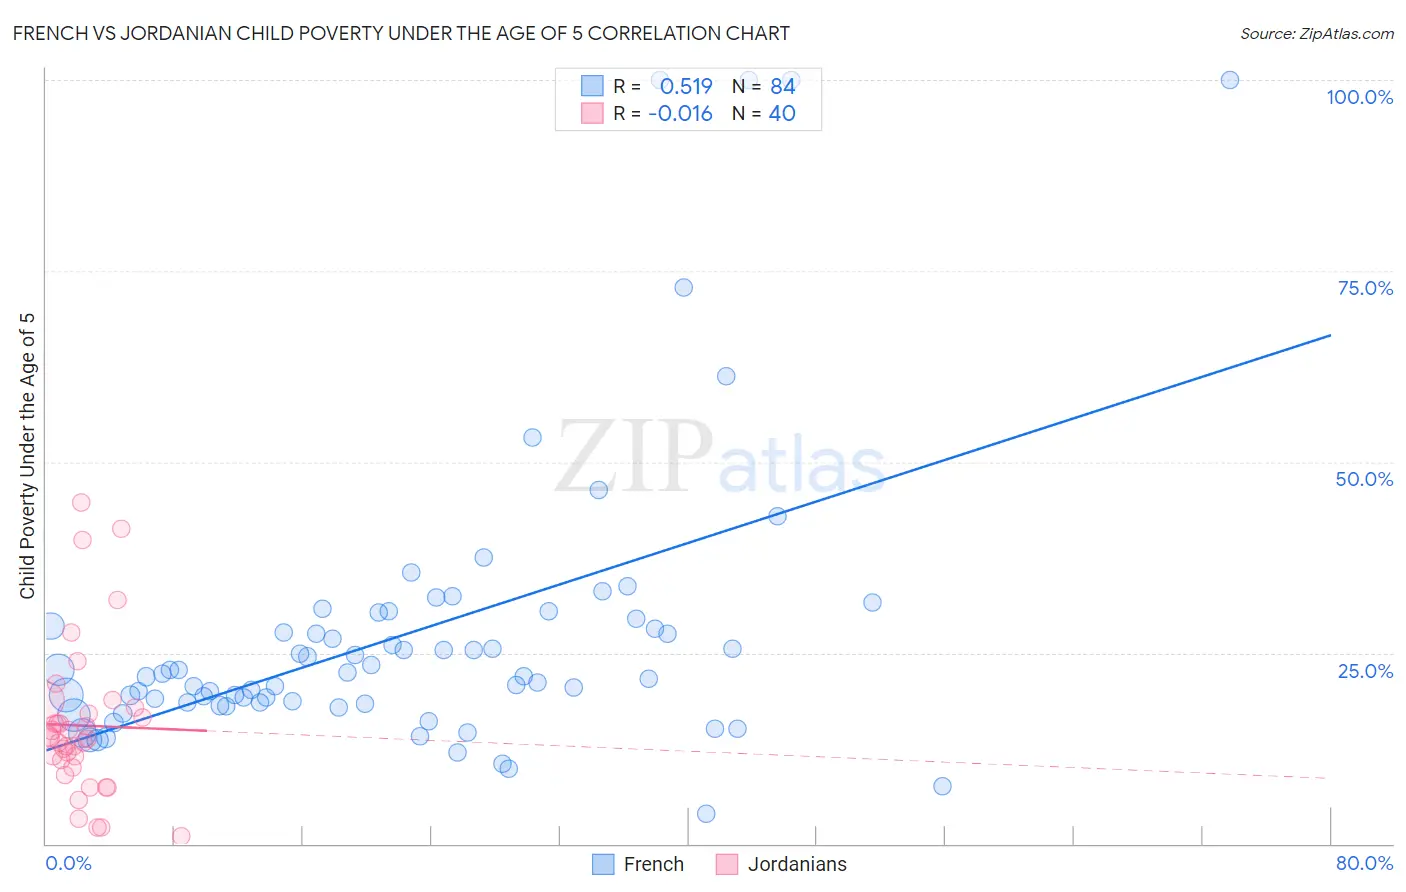 French vs Jordanian Child Poverty Under the Age of 5